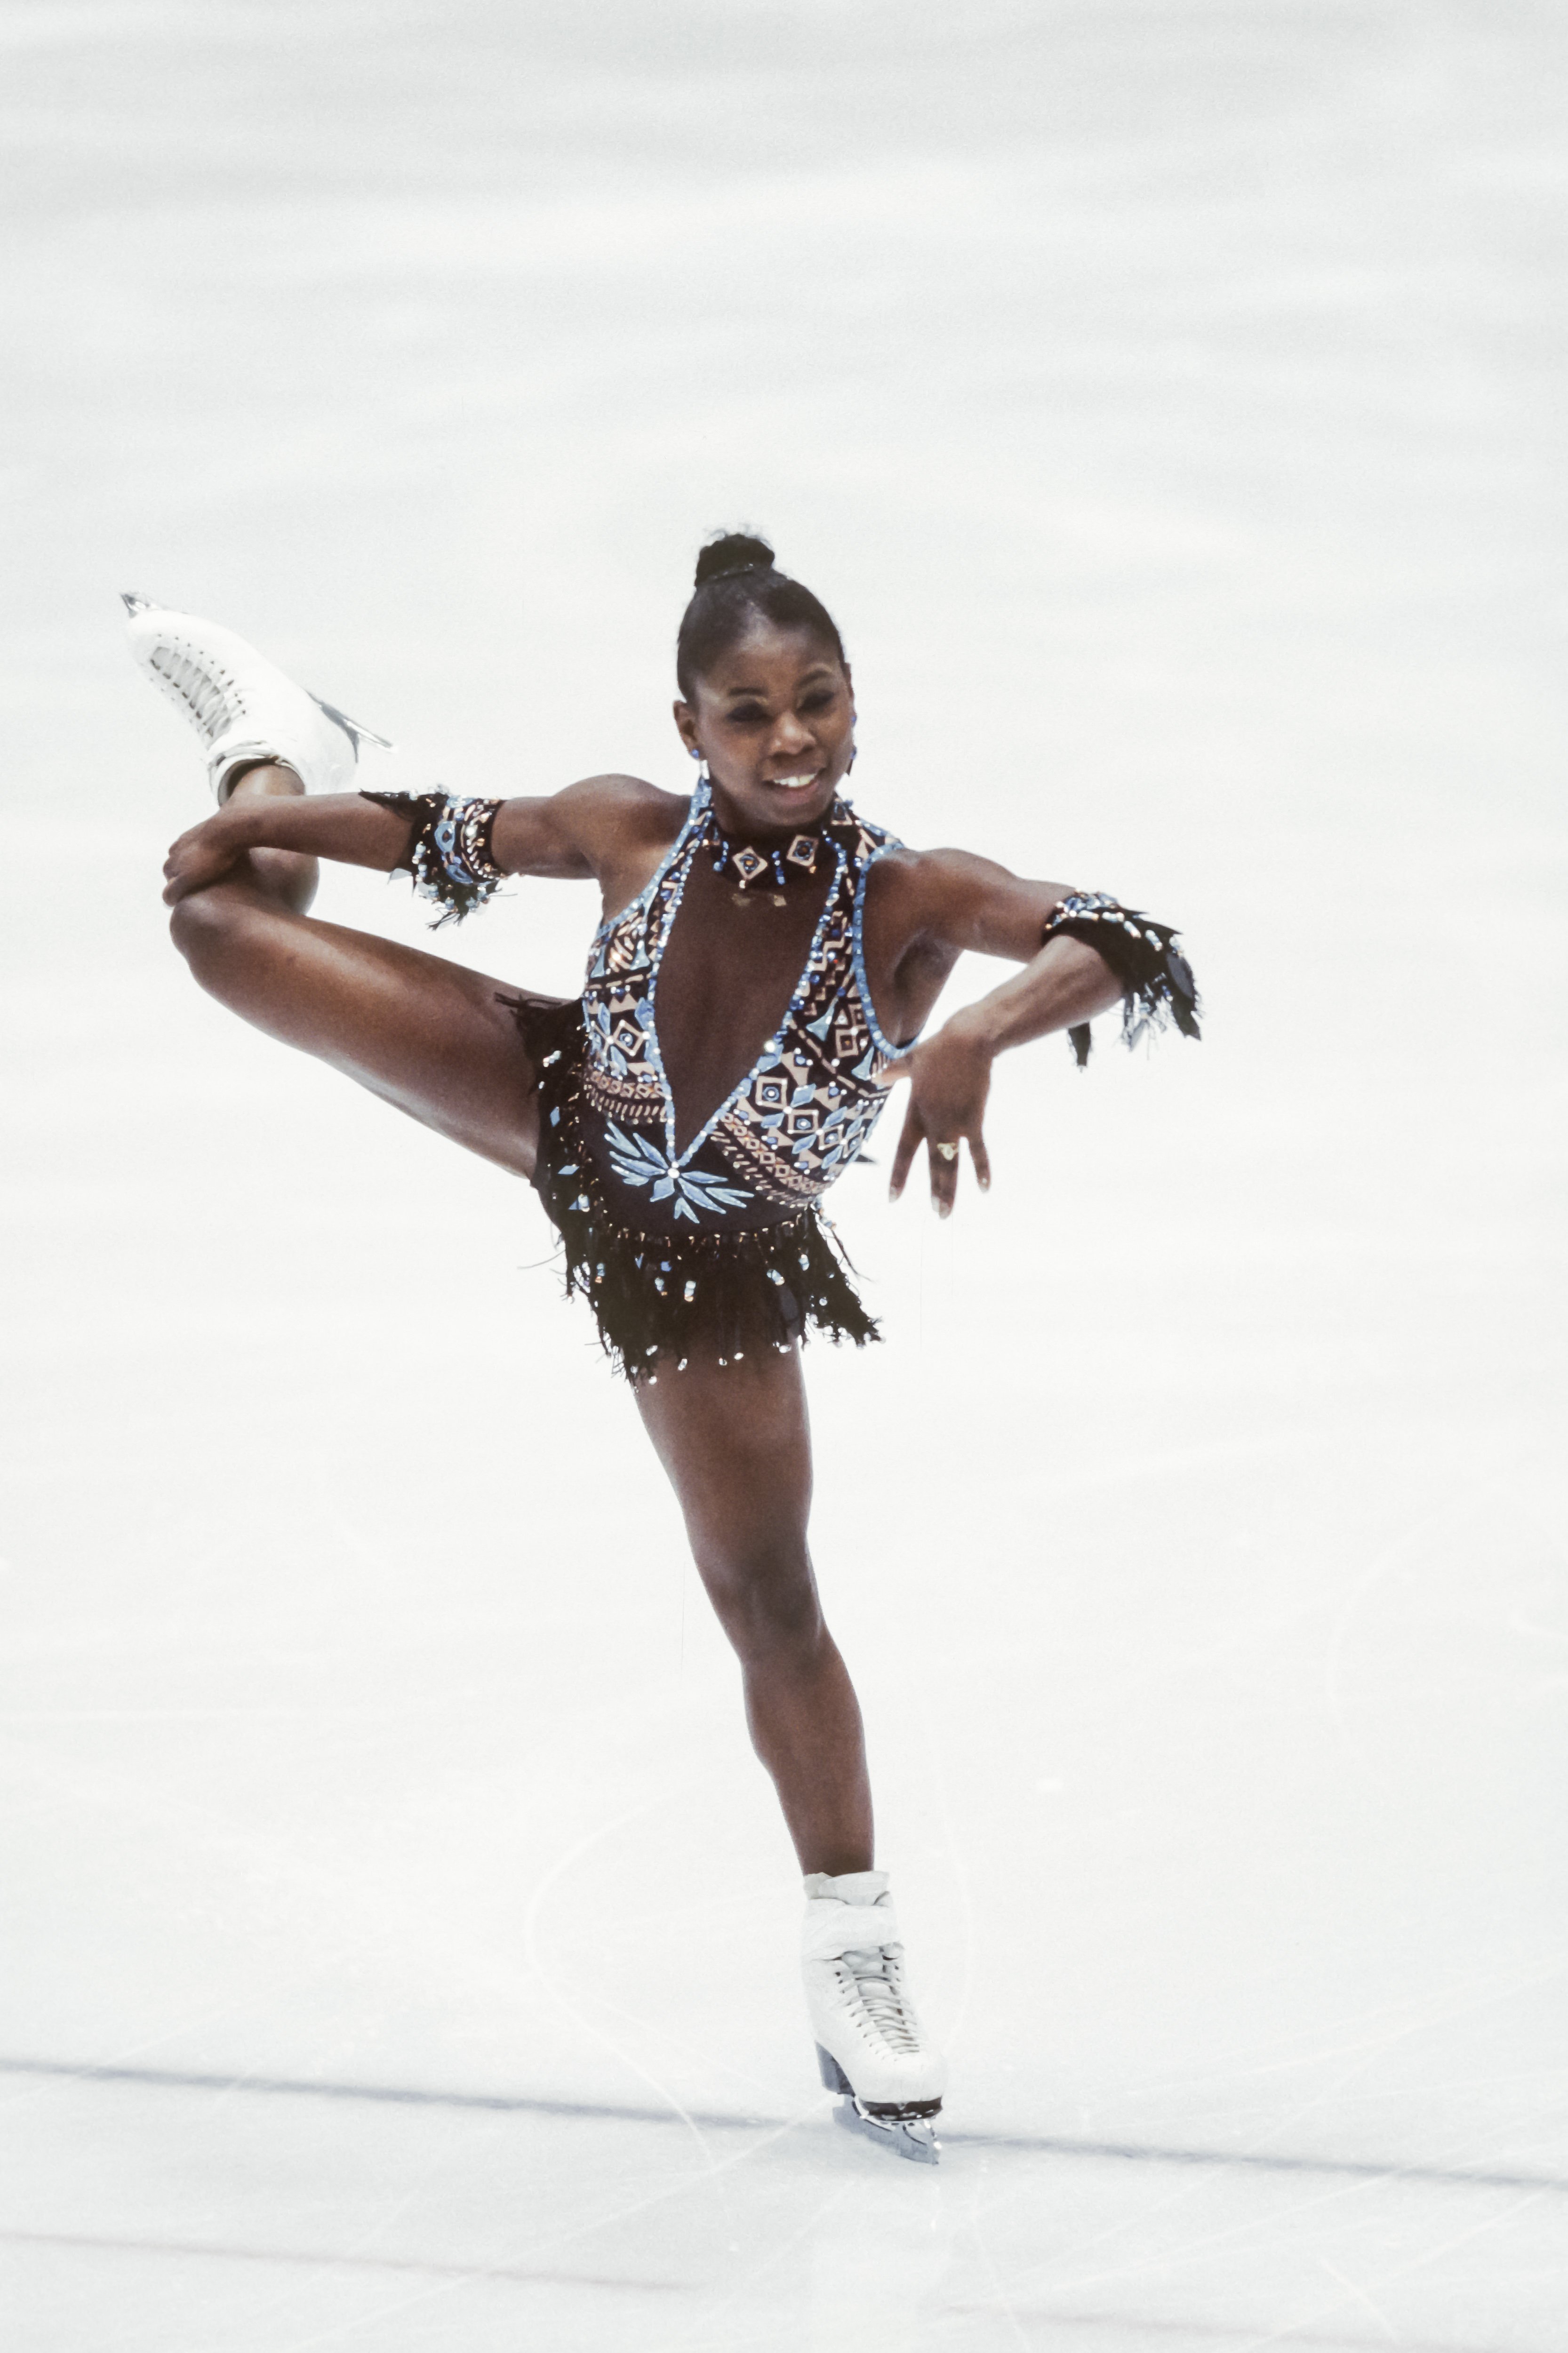  Surya Bonaly of France skates her short program of the Ladies Singles event of the figure skating competition of the 1998 Winter Olympics held on February 18, 1998 | Photo: Getty Images